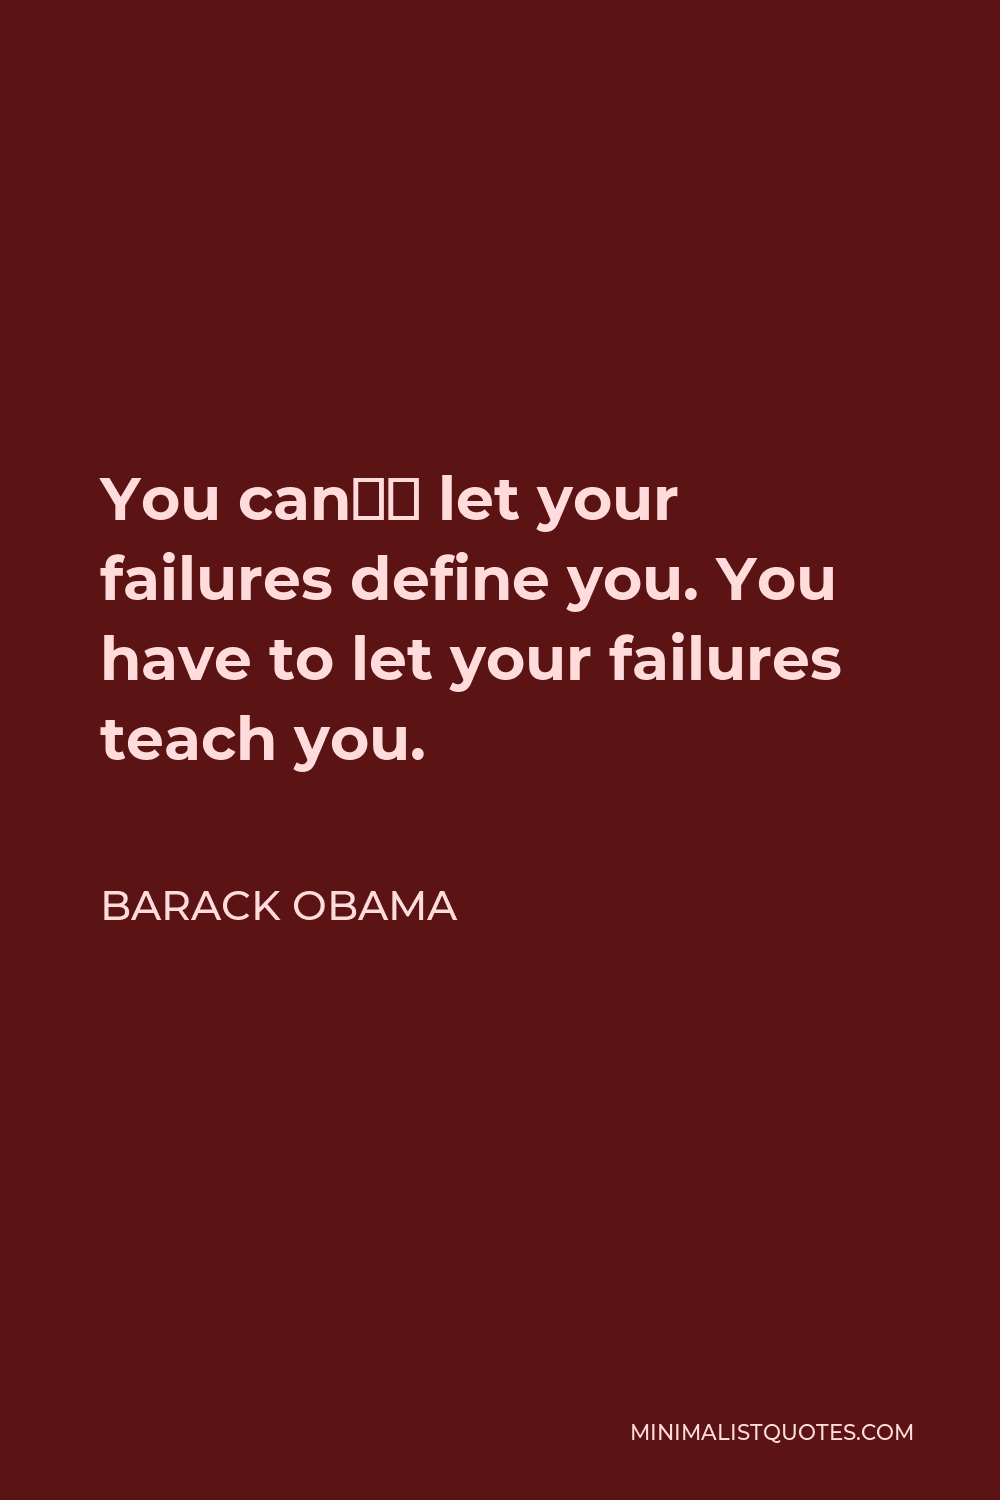 Barack Obama Quote - You can’t let your failures define you. You have to let your failures teach you.